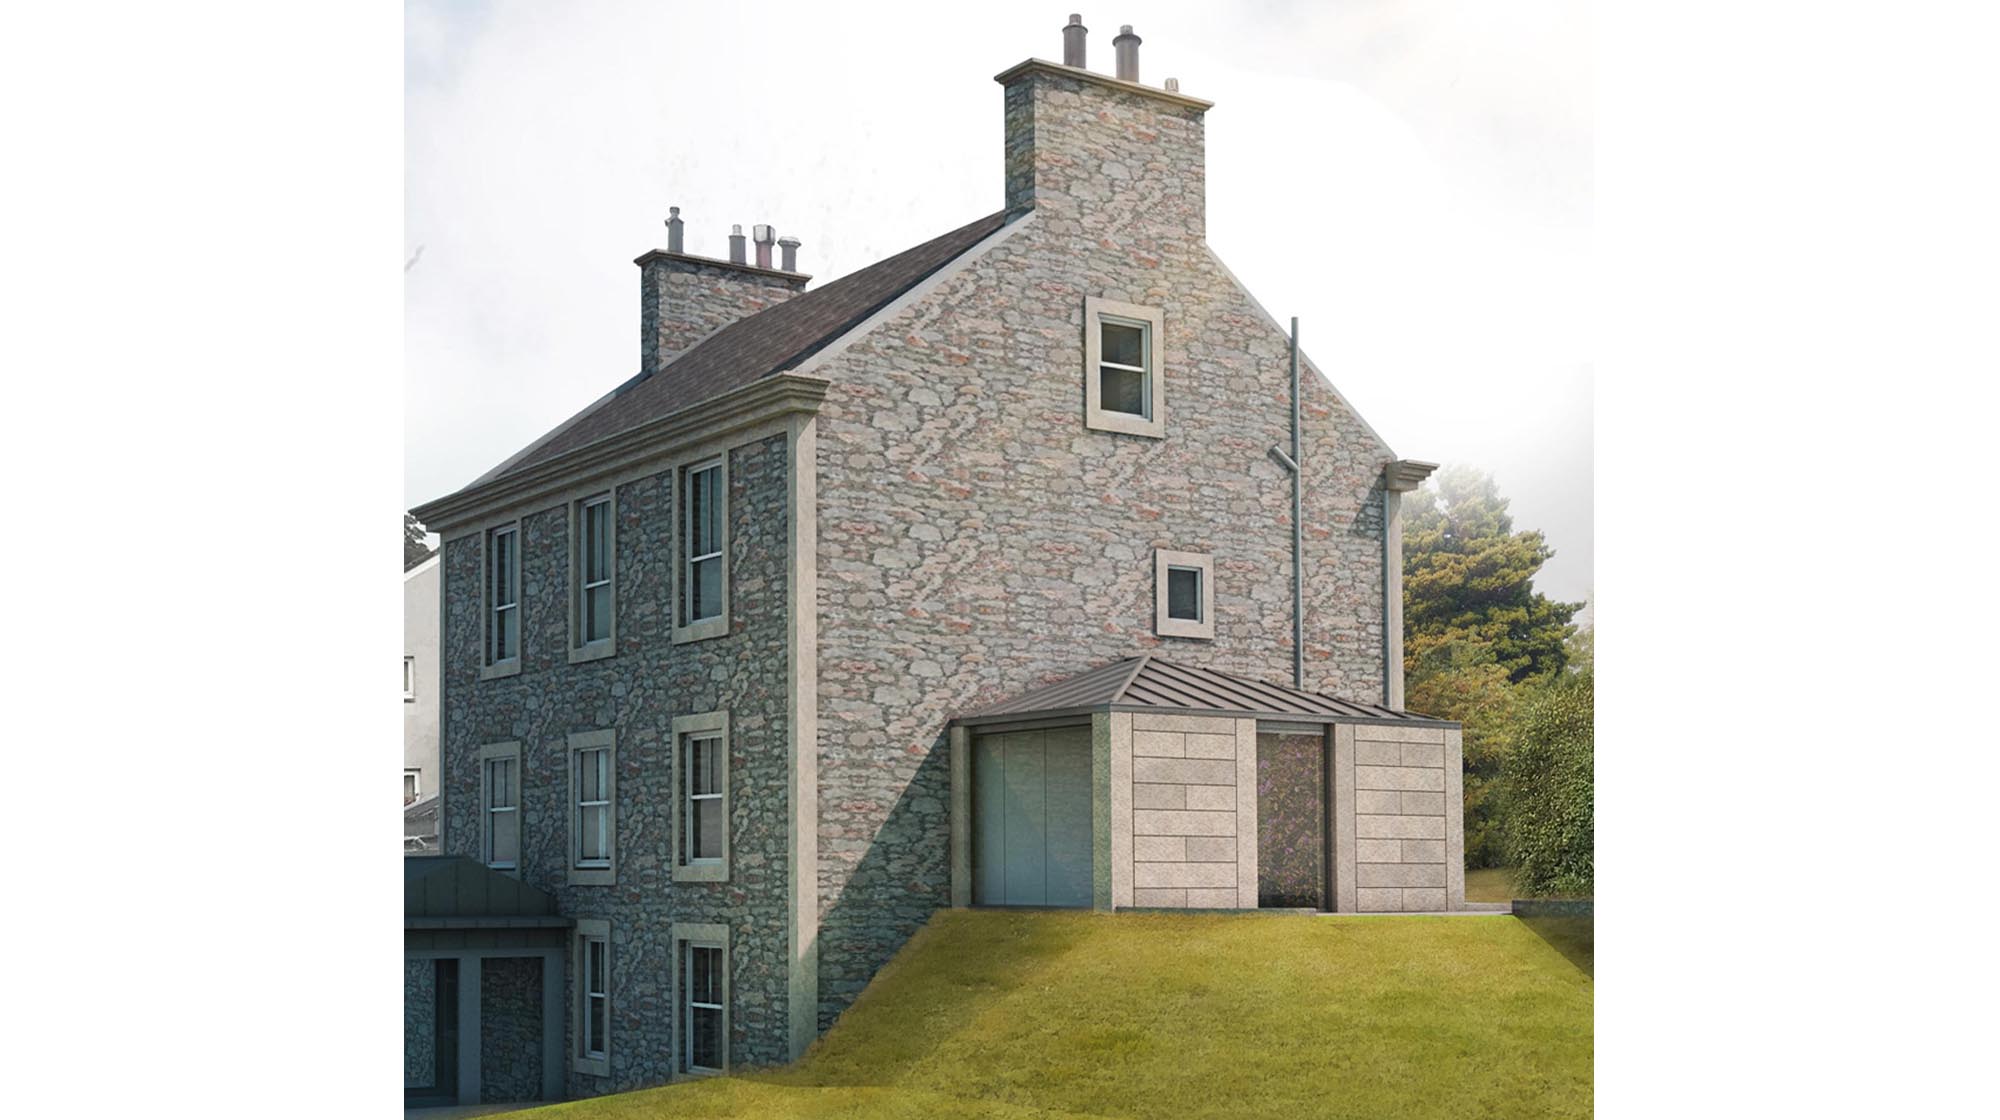 Extension to Listed Crammond House Approved{categories}, {category_name}{/categories}